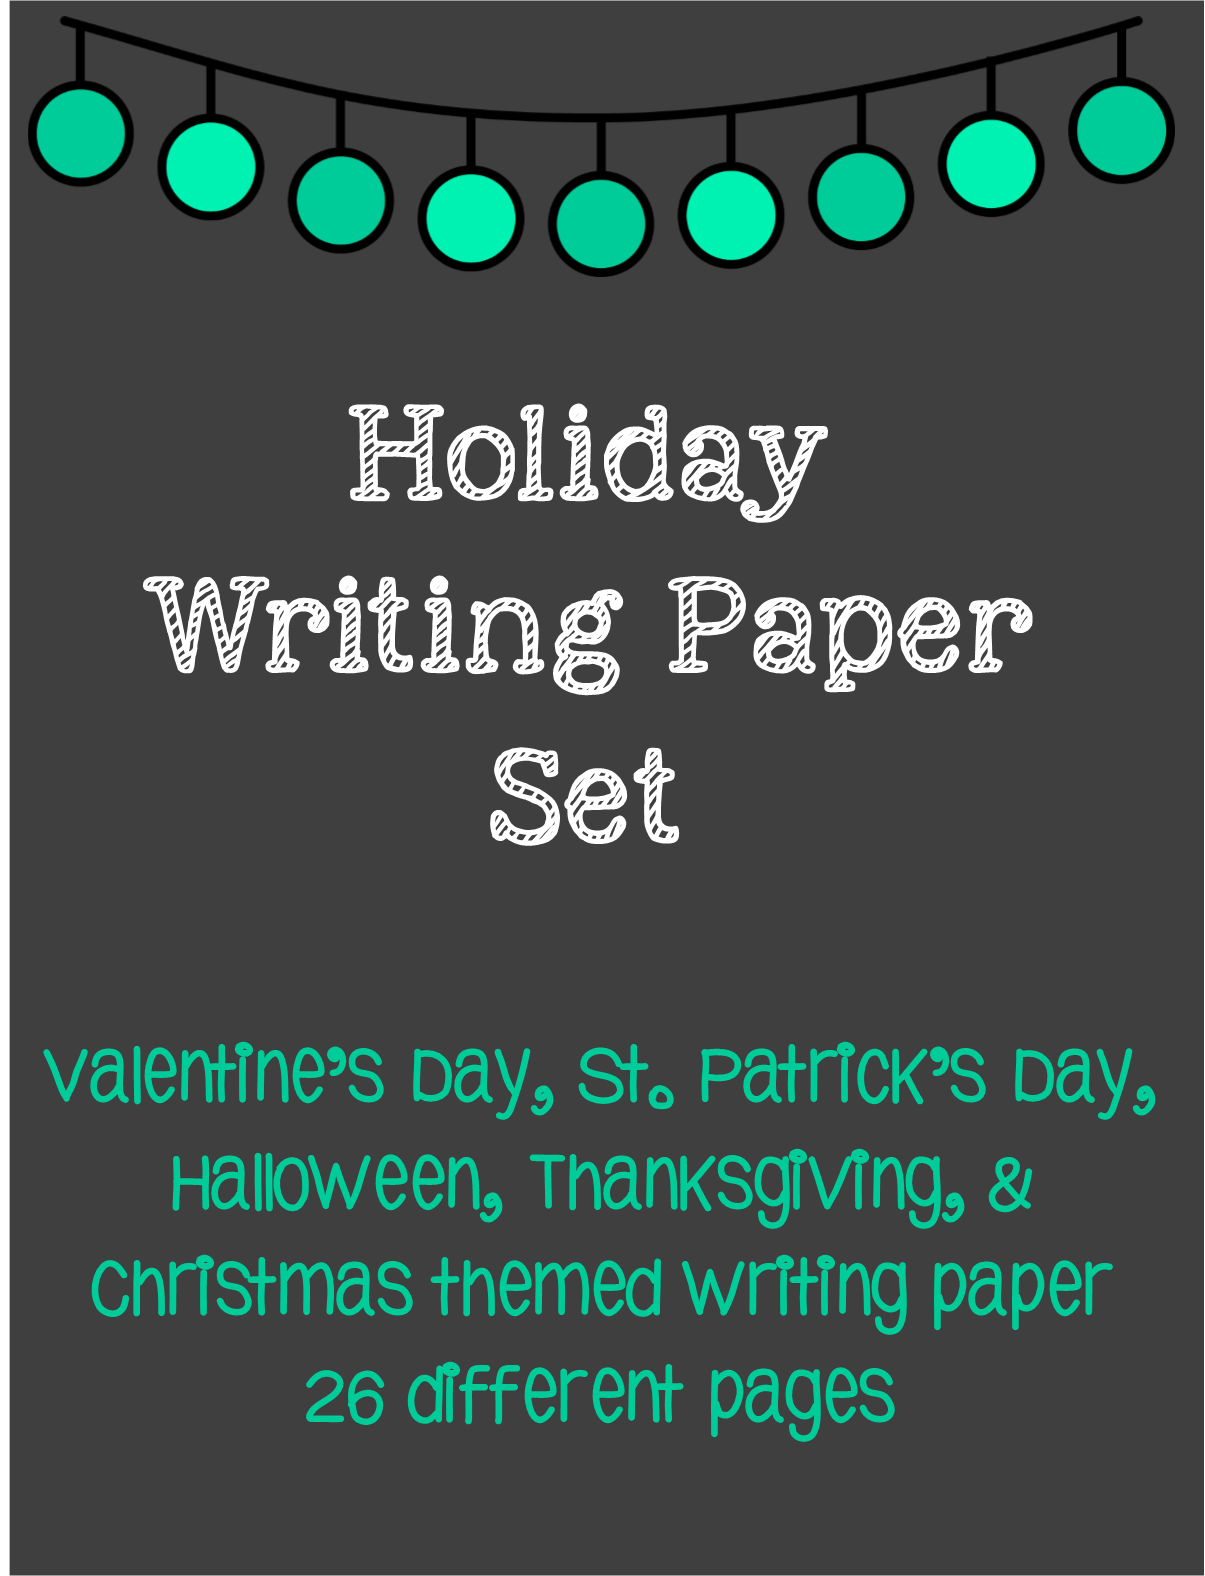 http://www.teacherspayteachers.com/Product/Writing-Paper-Set-with-Colorful-Frames-27-pages-696608